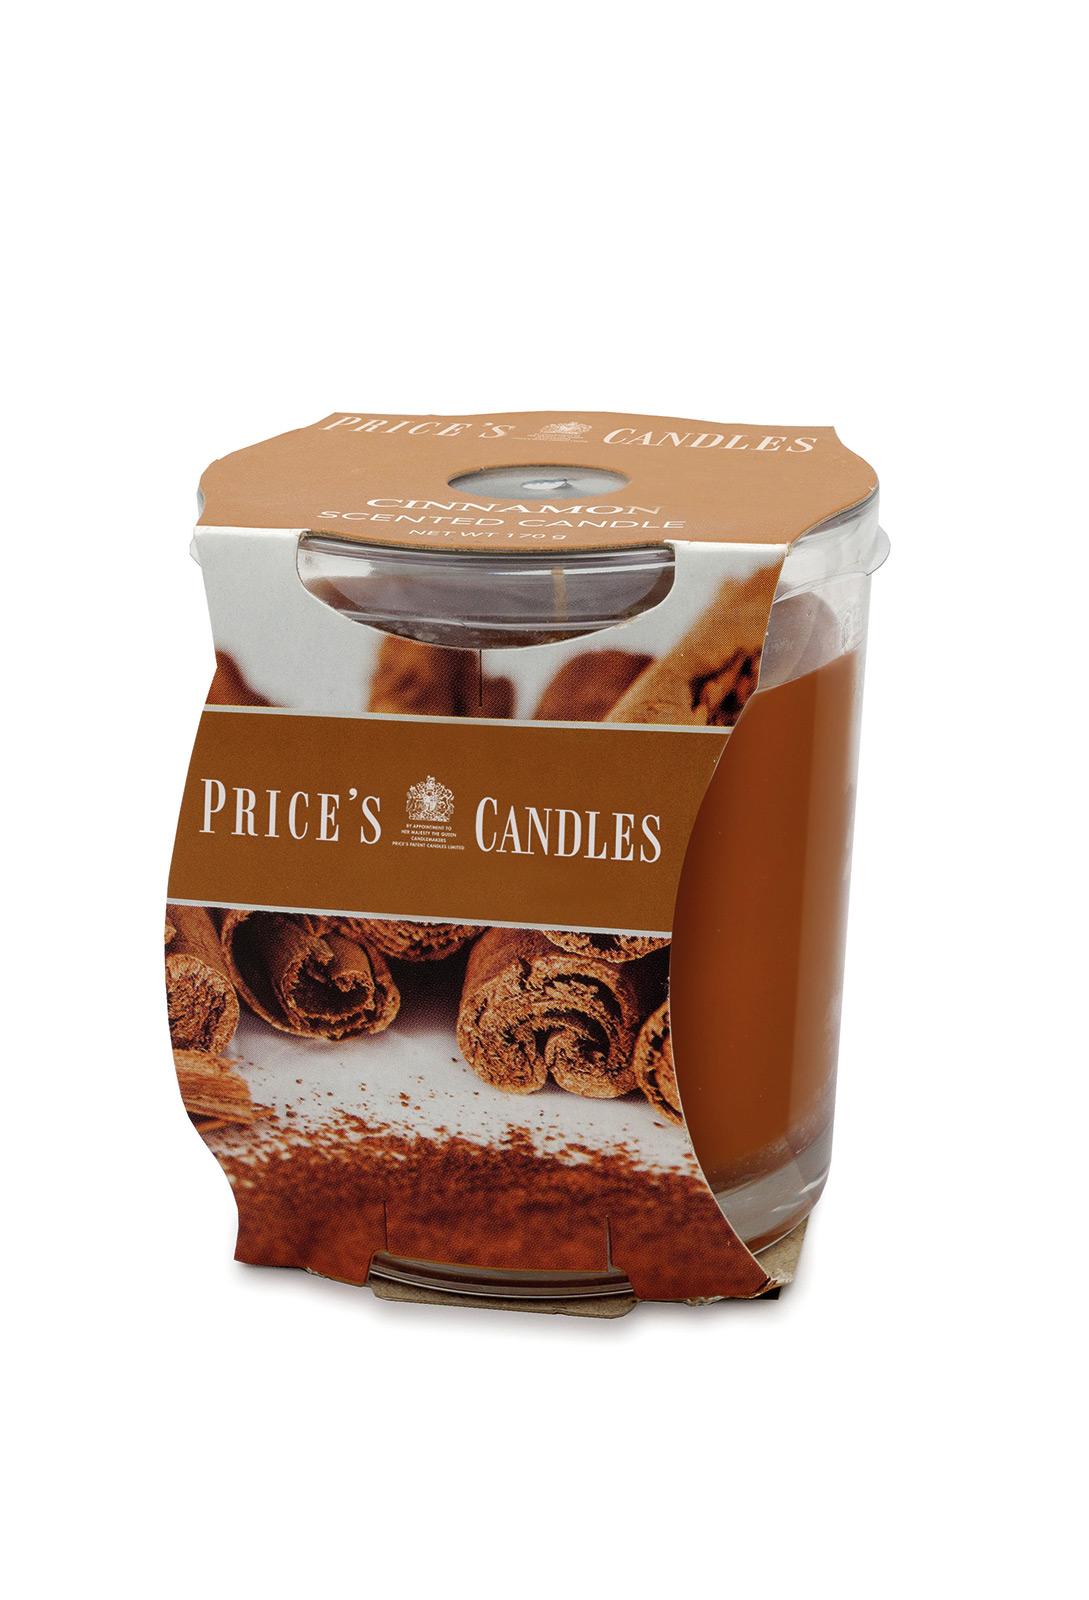 Prices Candle "Cinnamon" 170g     